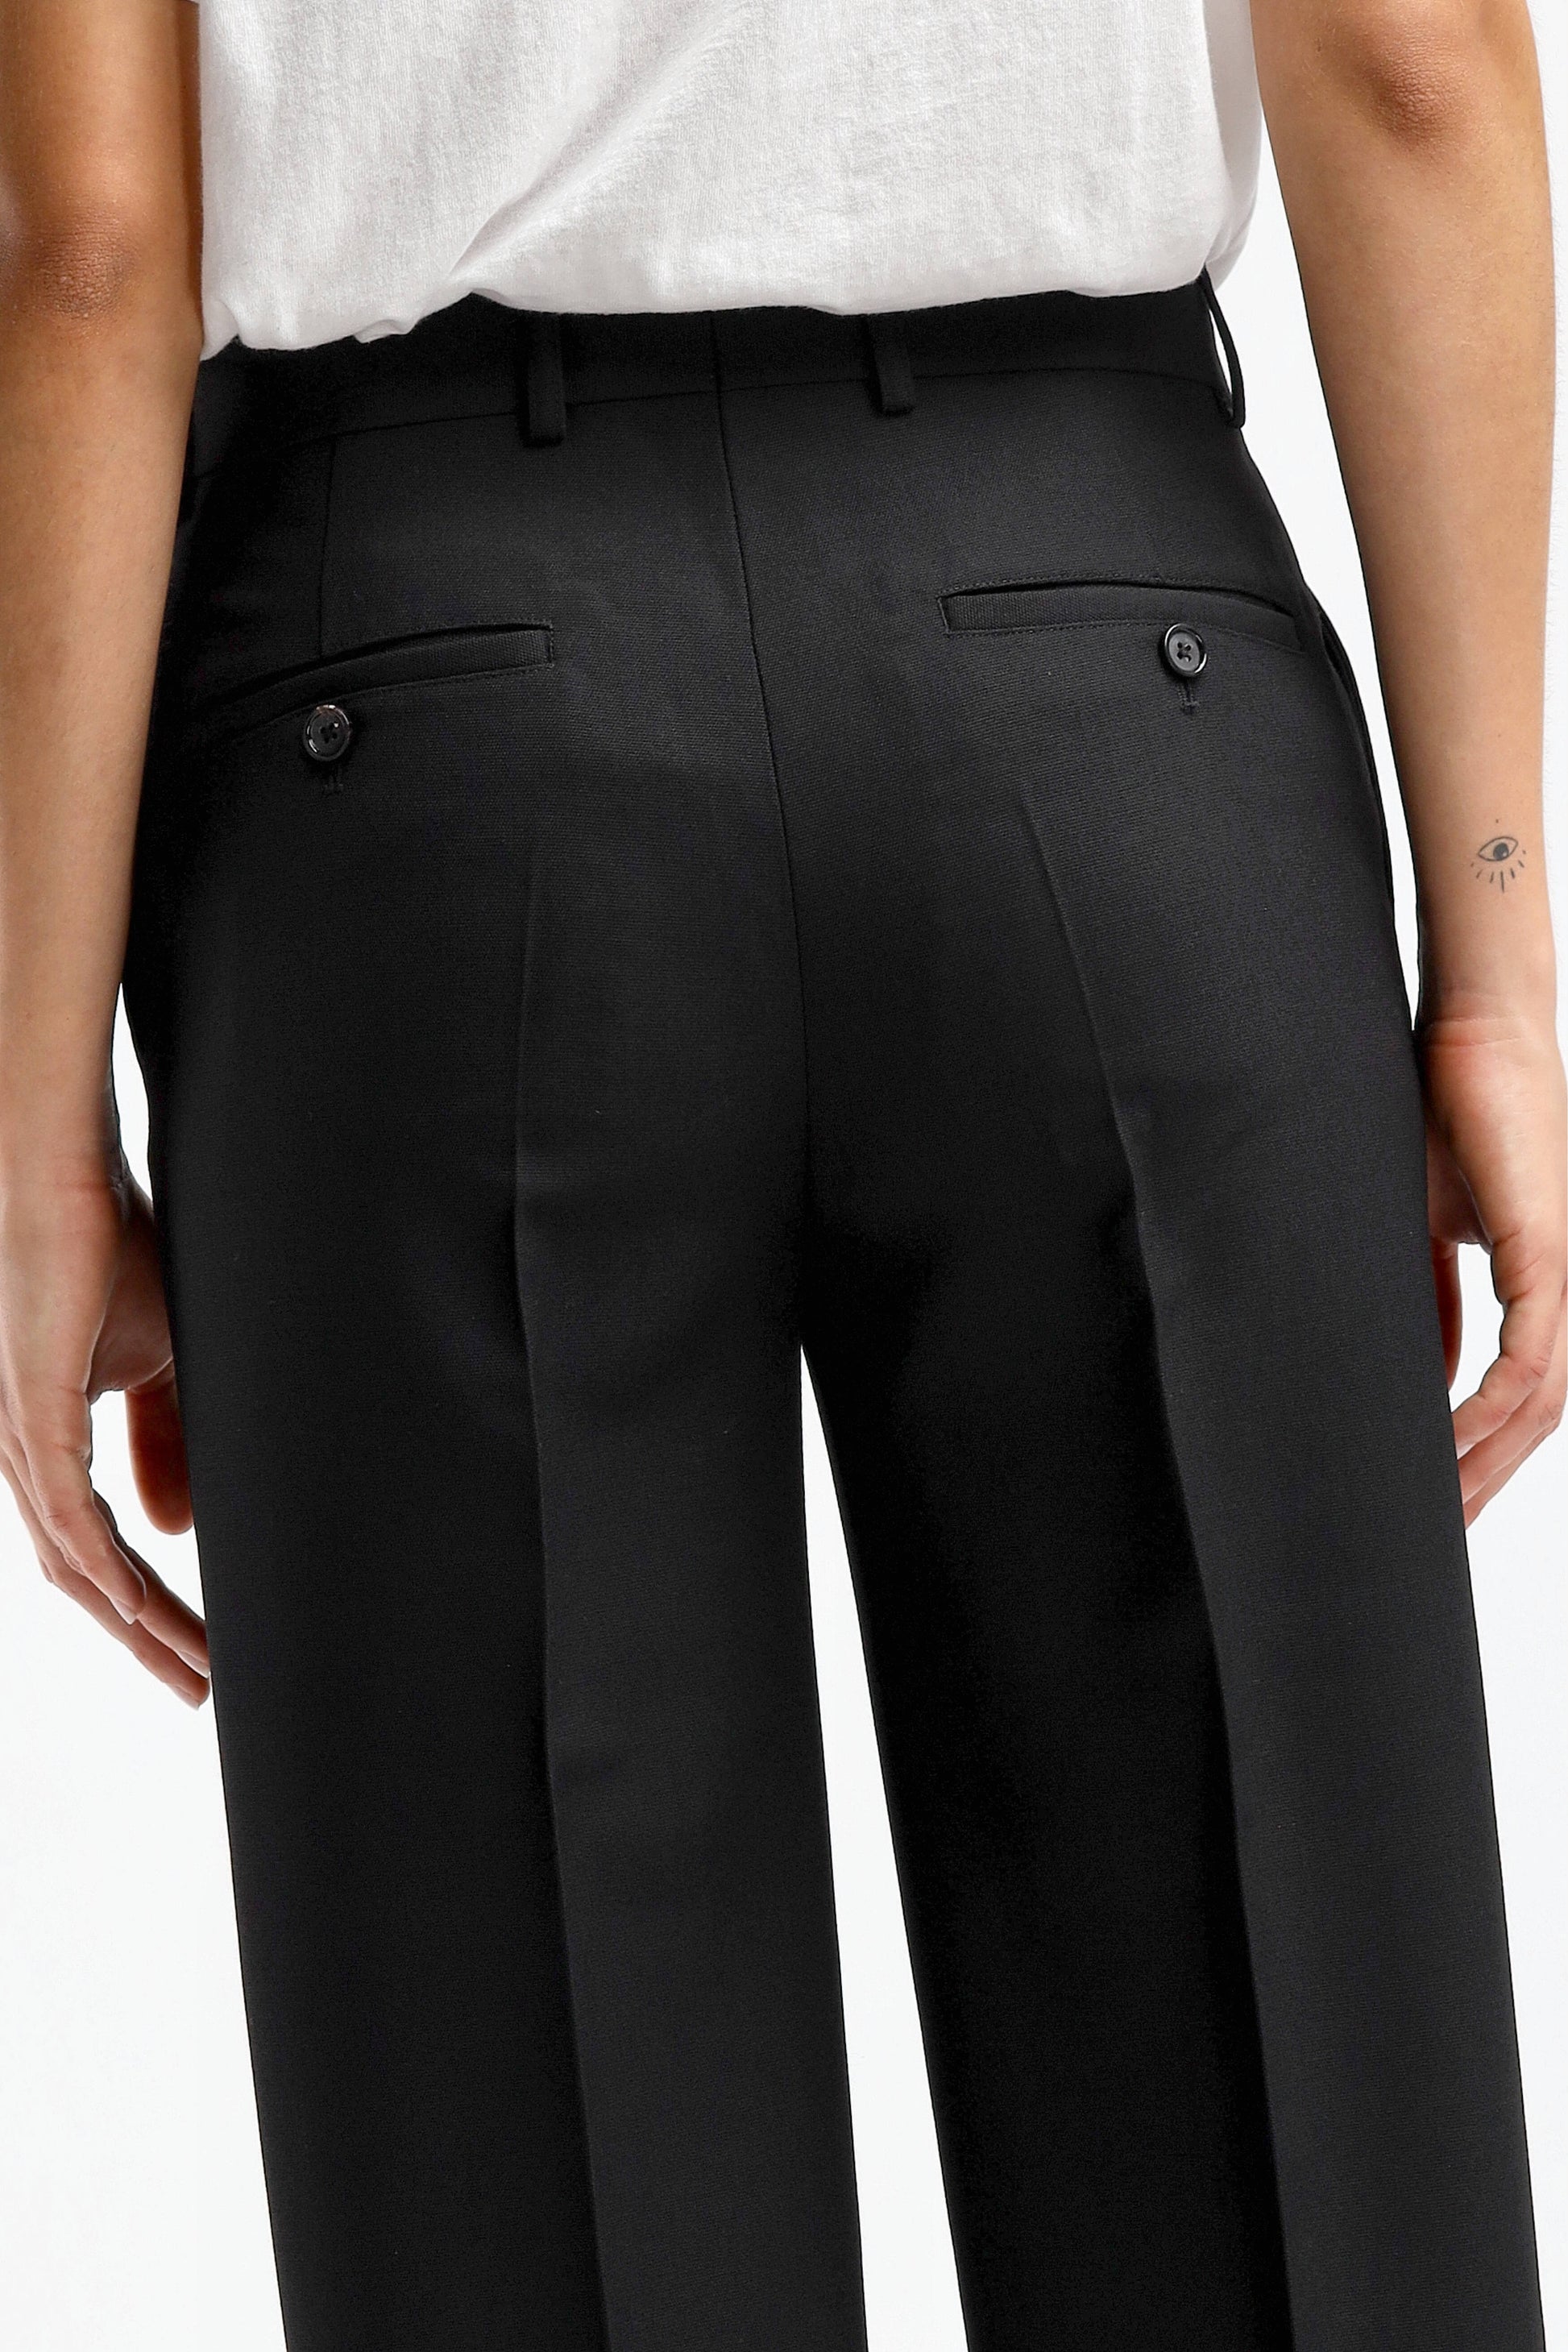 Hose Tailored Suit in SchwarzToteme - Anita Hass